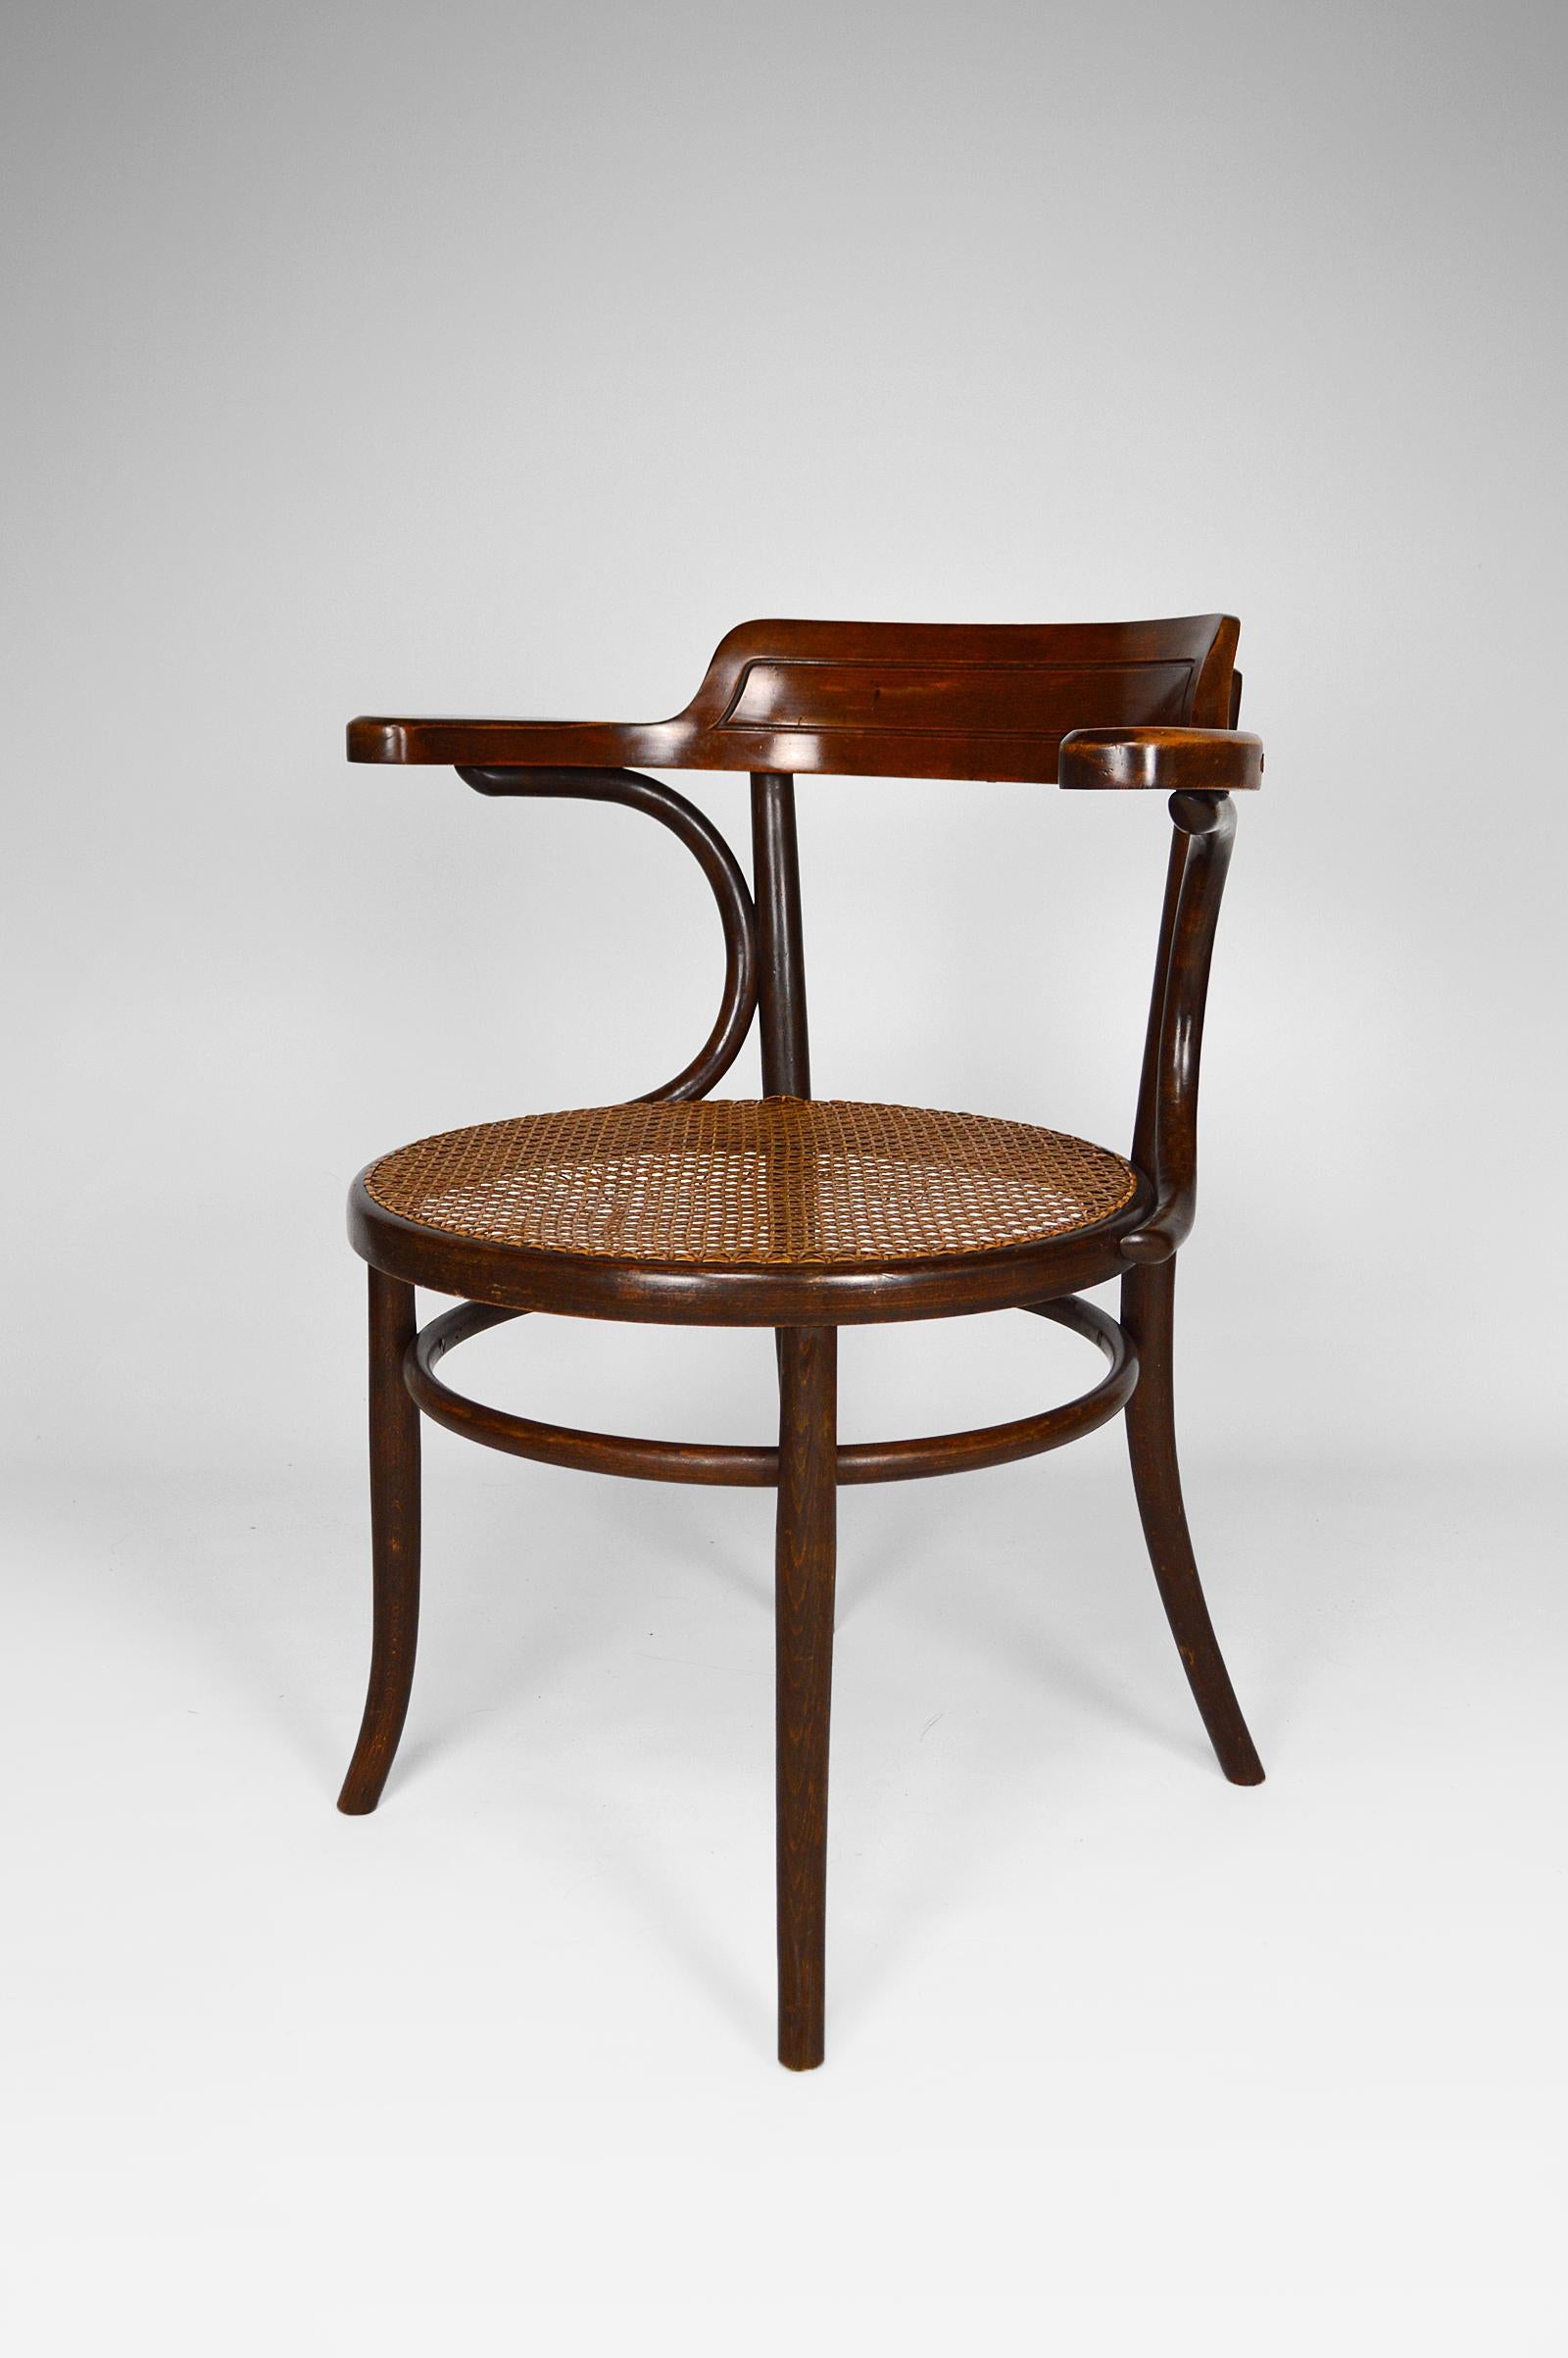 Superb office / desk armchair with bentwood structure (beech) and caned seat.
Manufacturer's stamp and label present.

Art Nouveau, Bohemia (current Czech Republic), around 1900.
By Fischel, one of the best known bentwood manufacturers along with